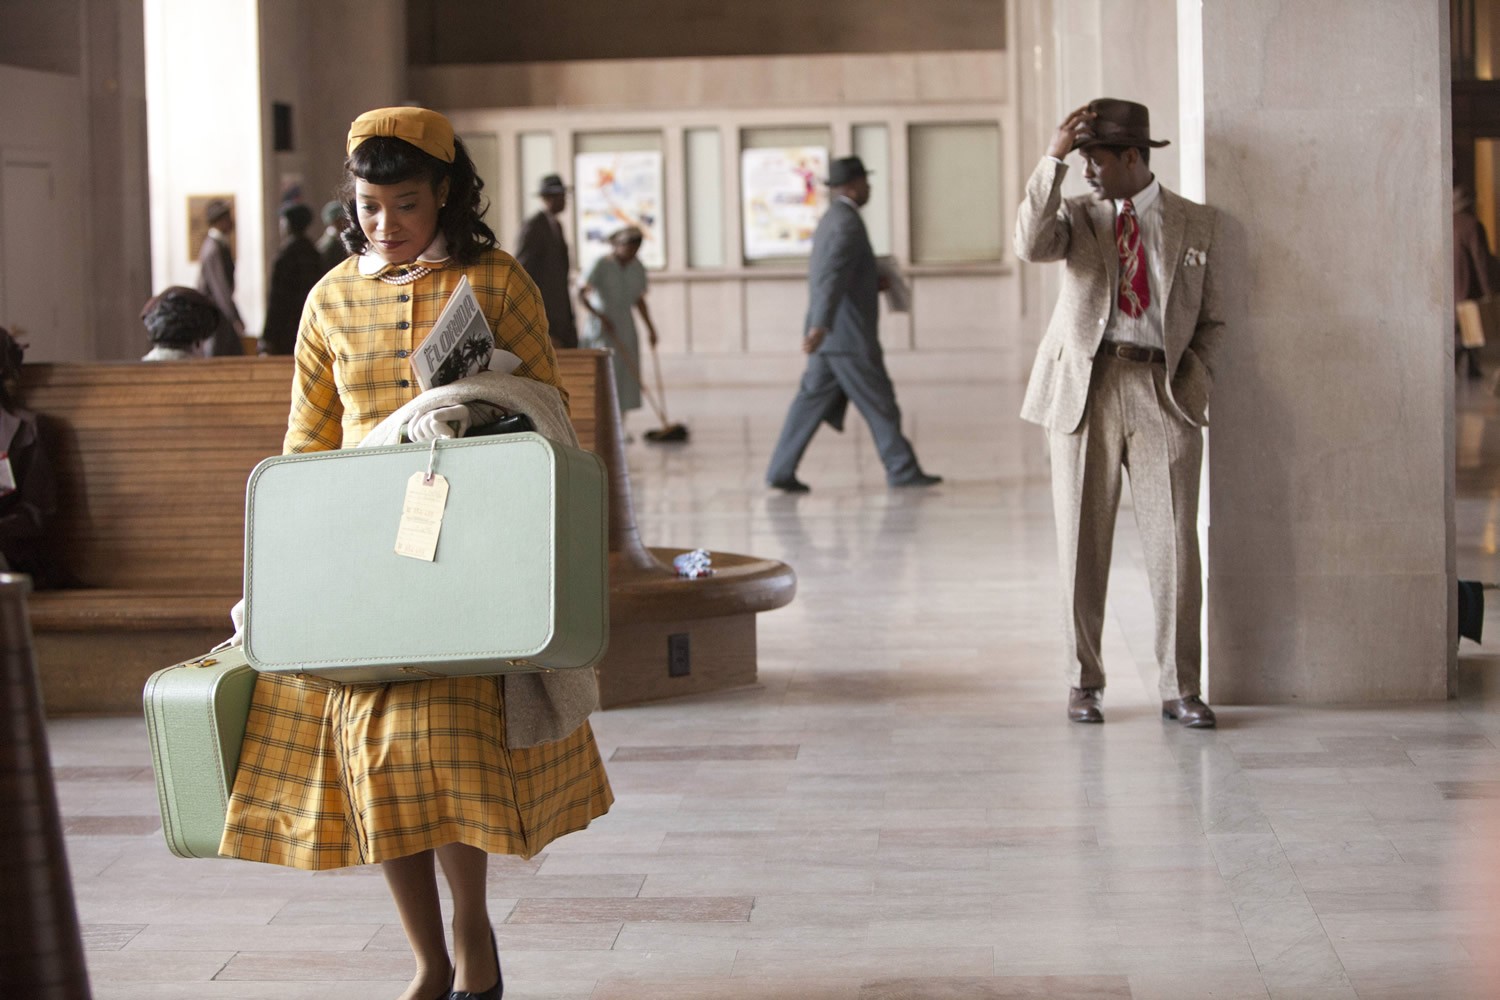 Keke Palmer stars as Thelma and Blair Underwood stars as Ludie Watts in Lifetime's The Trip to Bountiful (2014). Photo credit by Annette Brown.